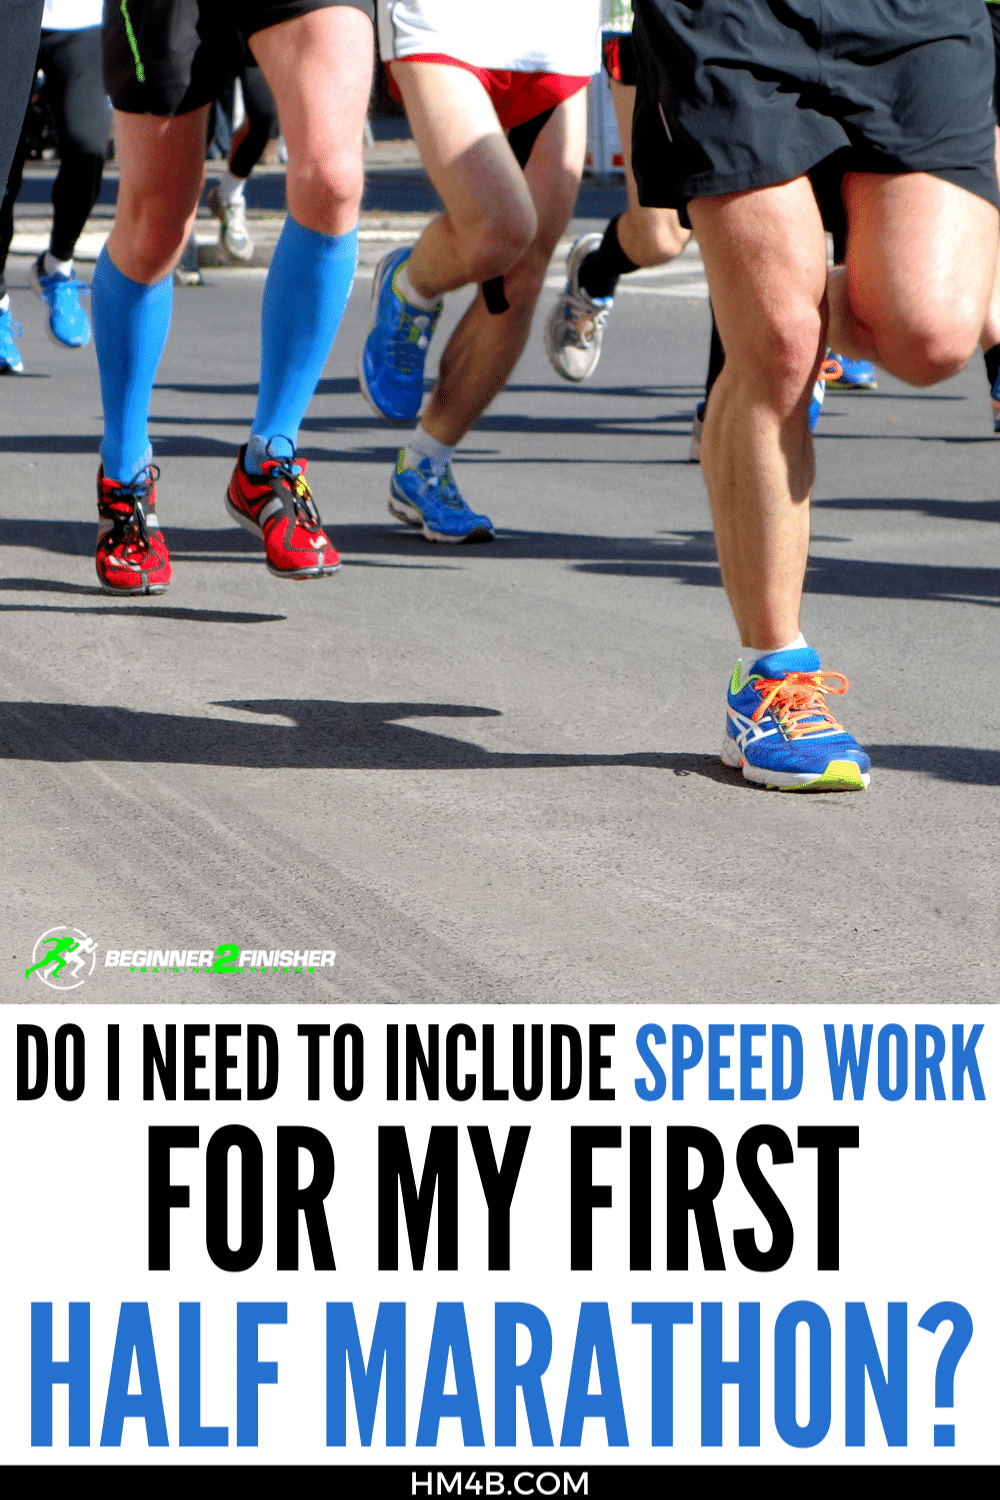 Do I need to include speed work for my first half marathon?